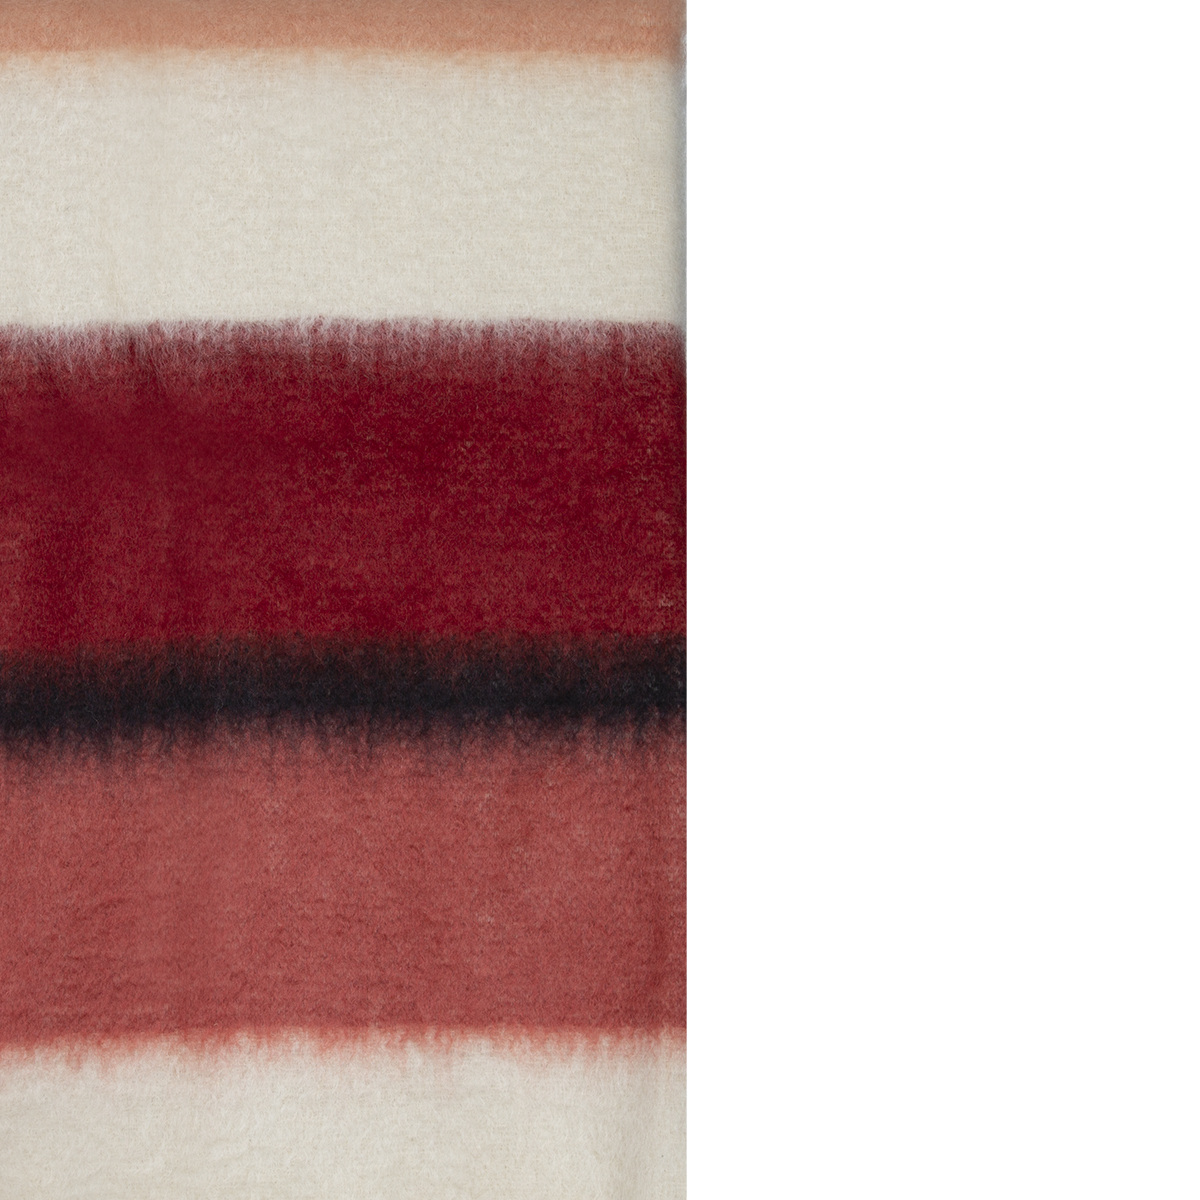 Plaid Serenity, Quetsche - L130 cm - Mohair / Wool - image 1